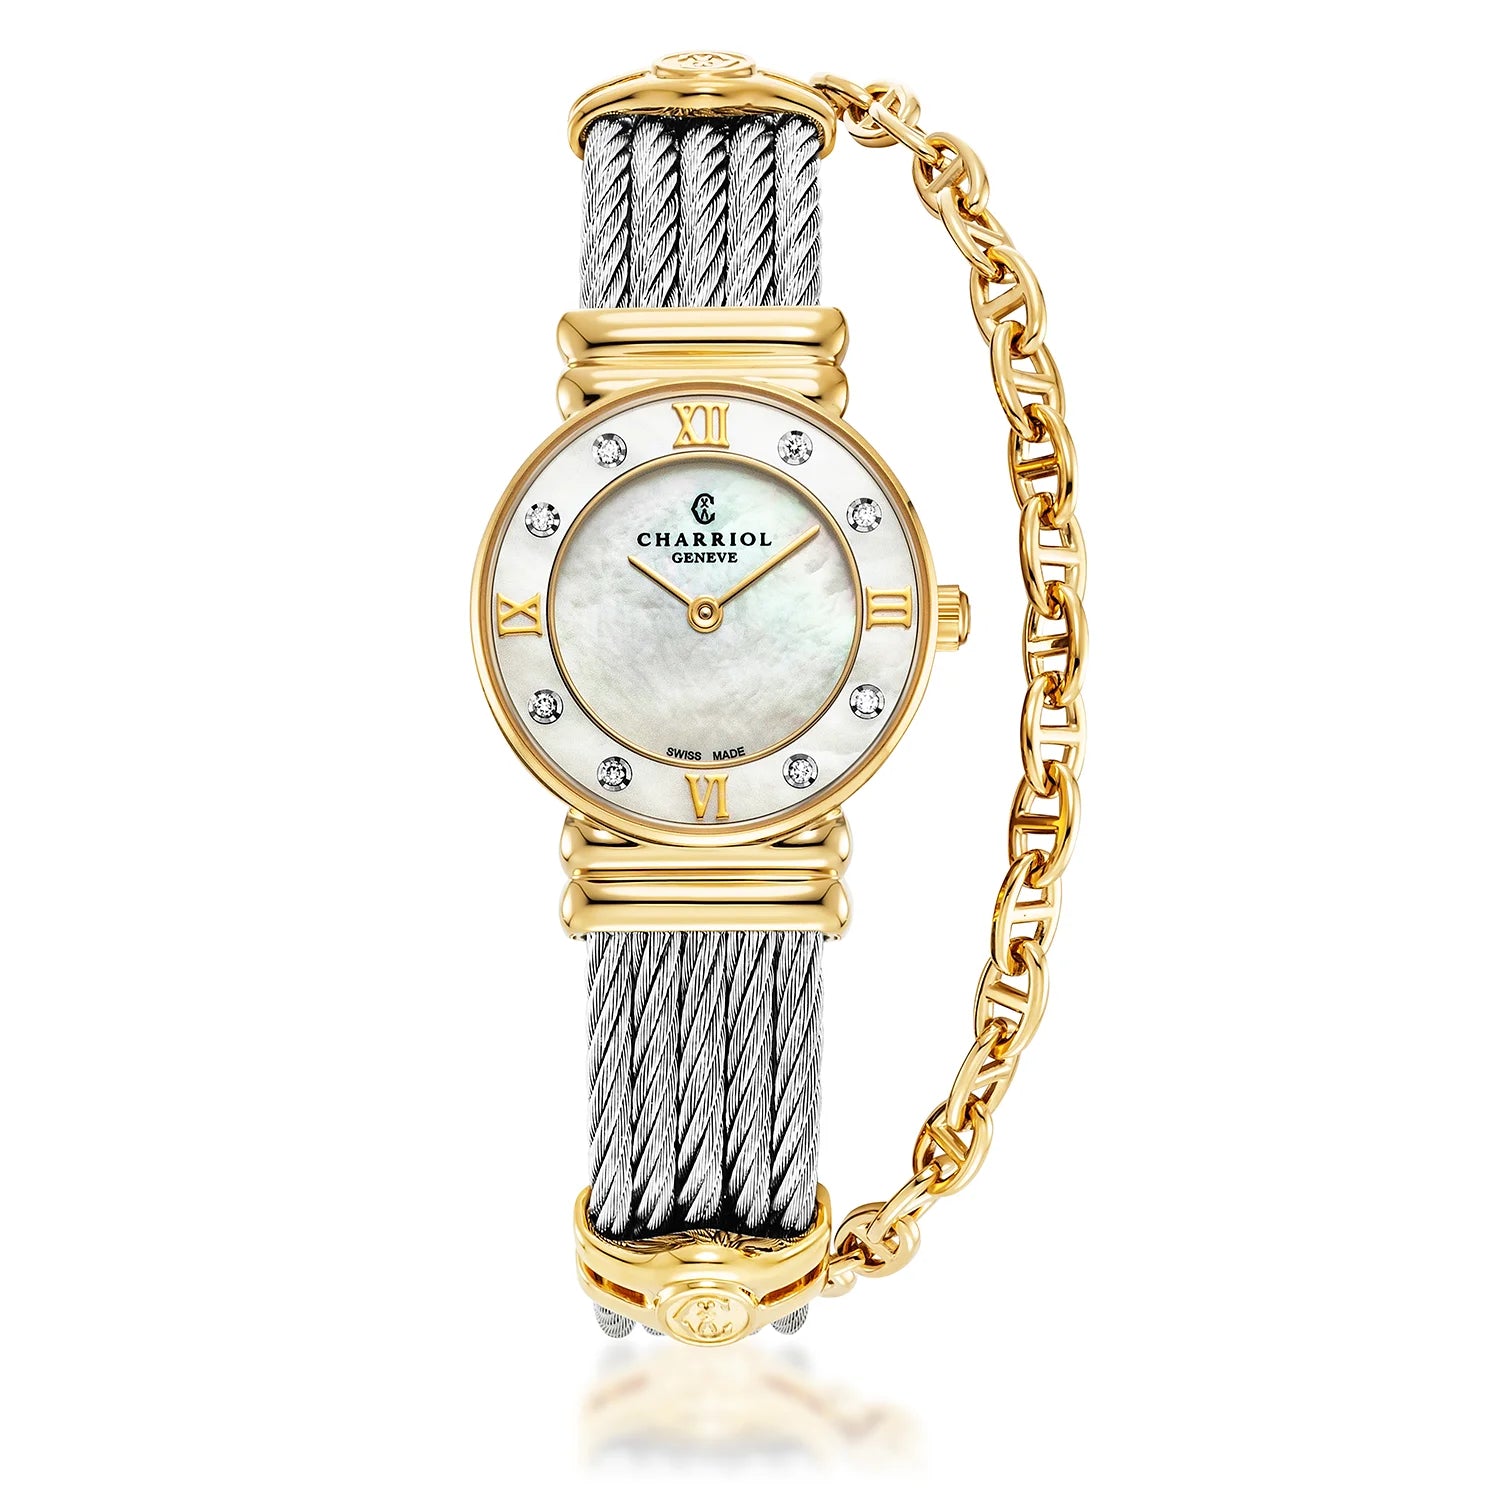 St Tropez Icon 24.5mm Watch Yellow Gold PVD, Steel Cable, 8 Diamonds Bezel and White MOP Dial - Charriol Geneve -  Watch